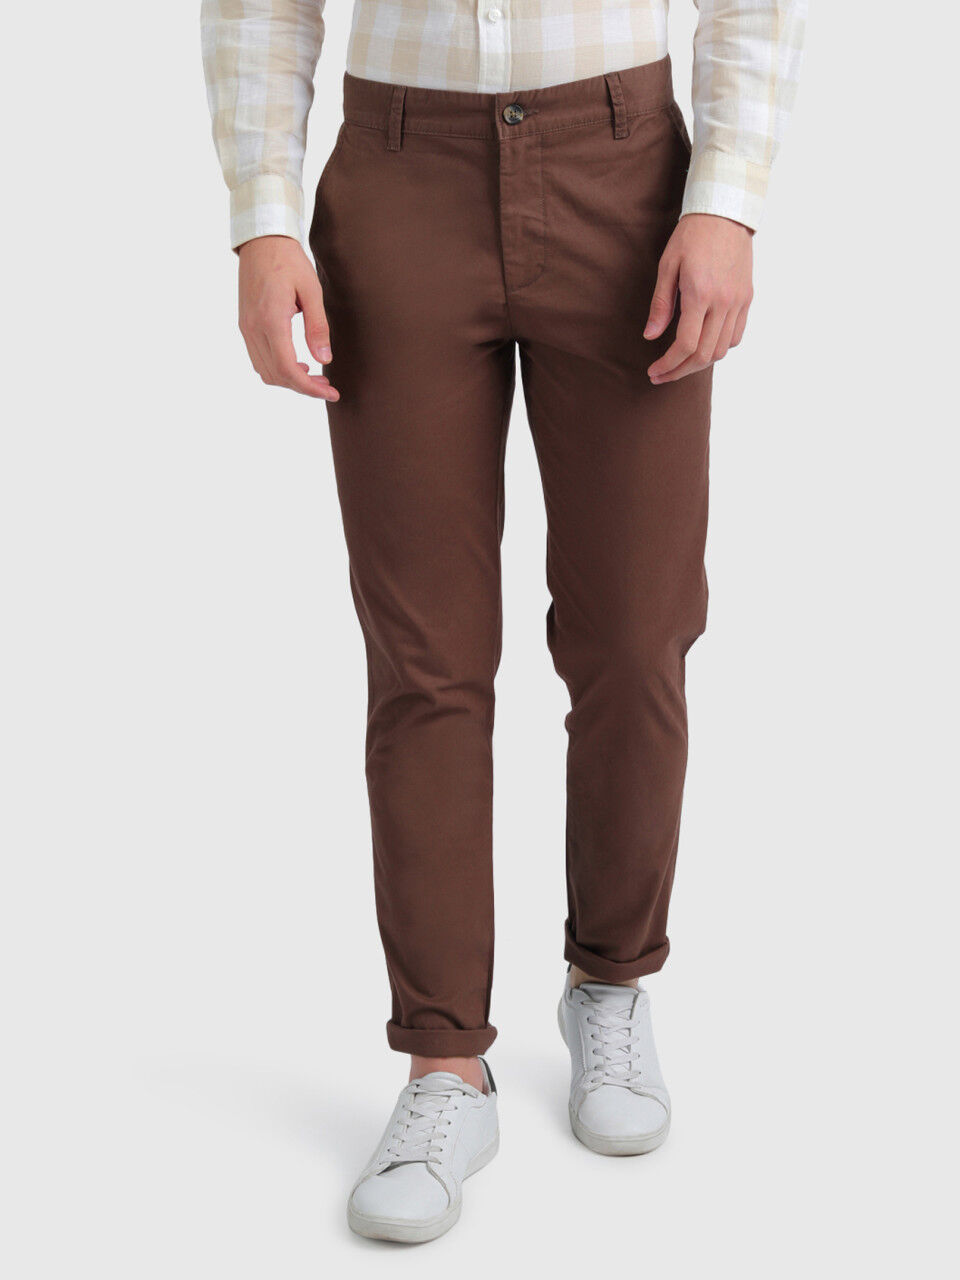 Cotton/Linen Solid Men Casual Cotton Chinos Trouser at Rs 365/piece in  Ahmedabad